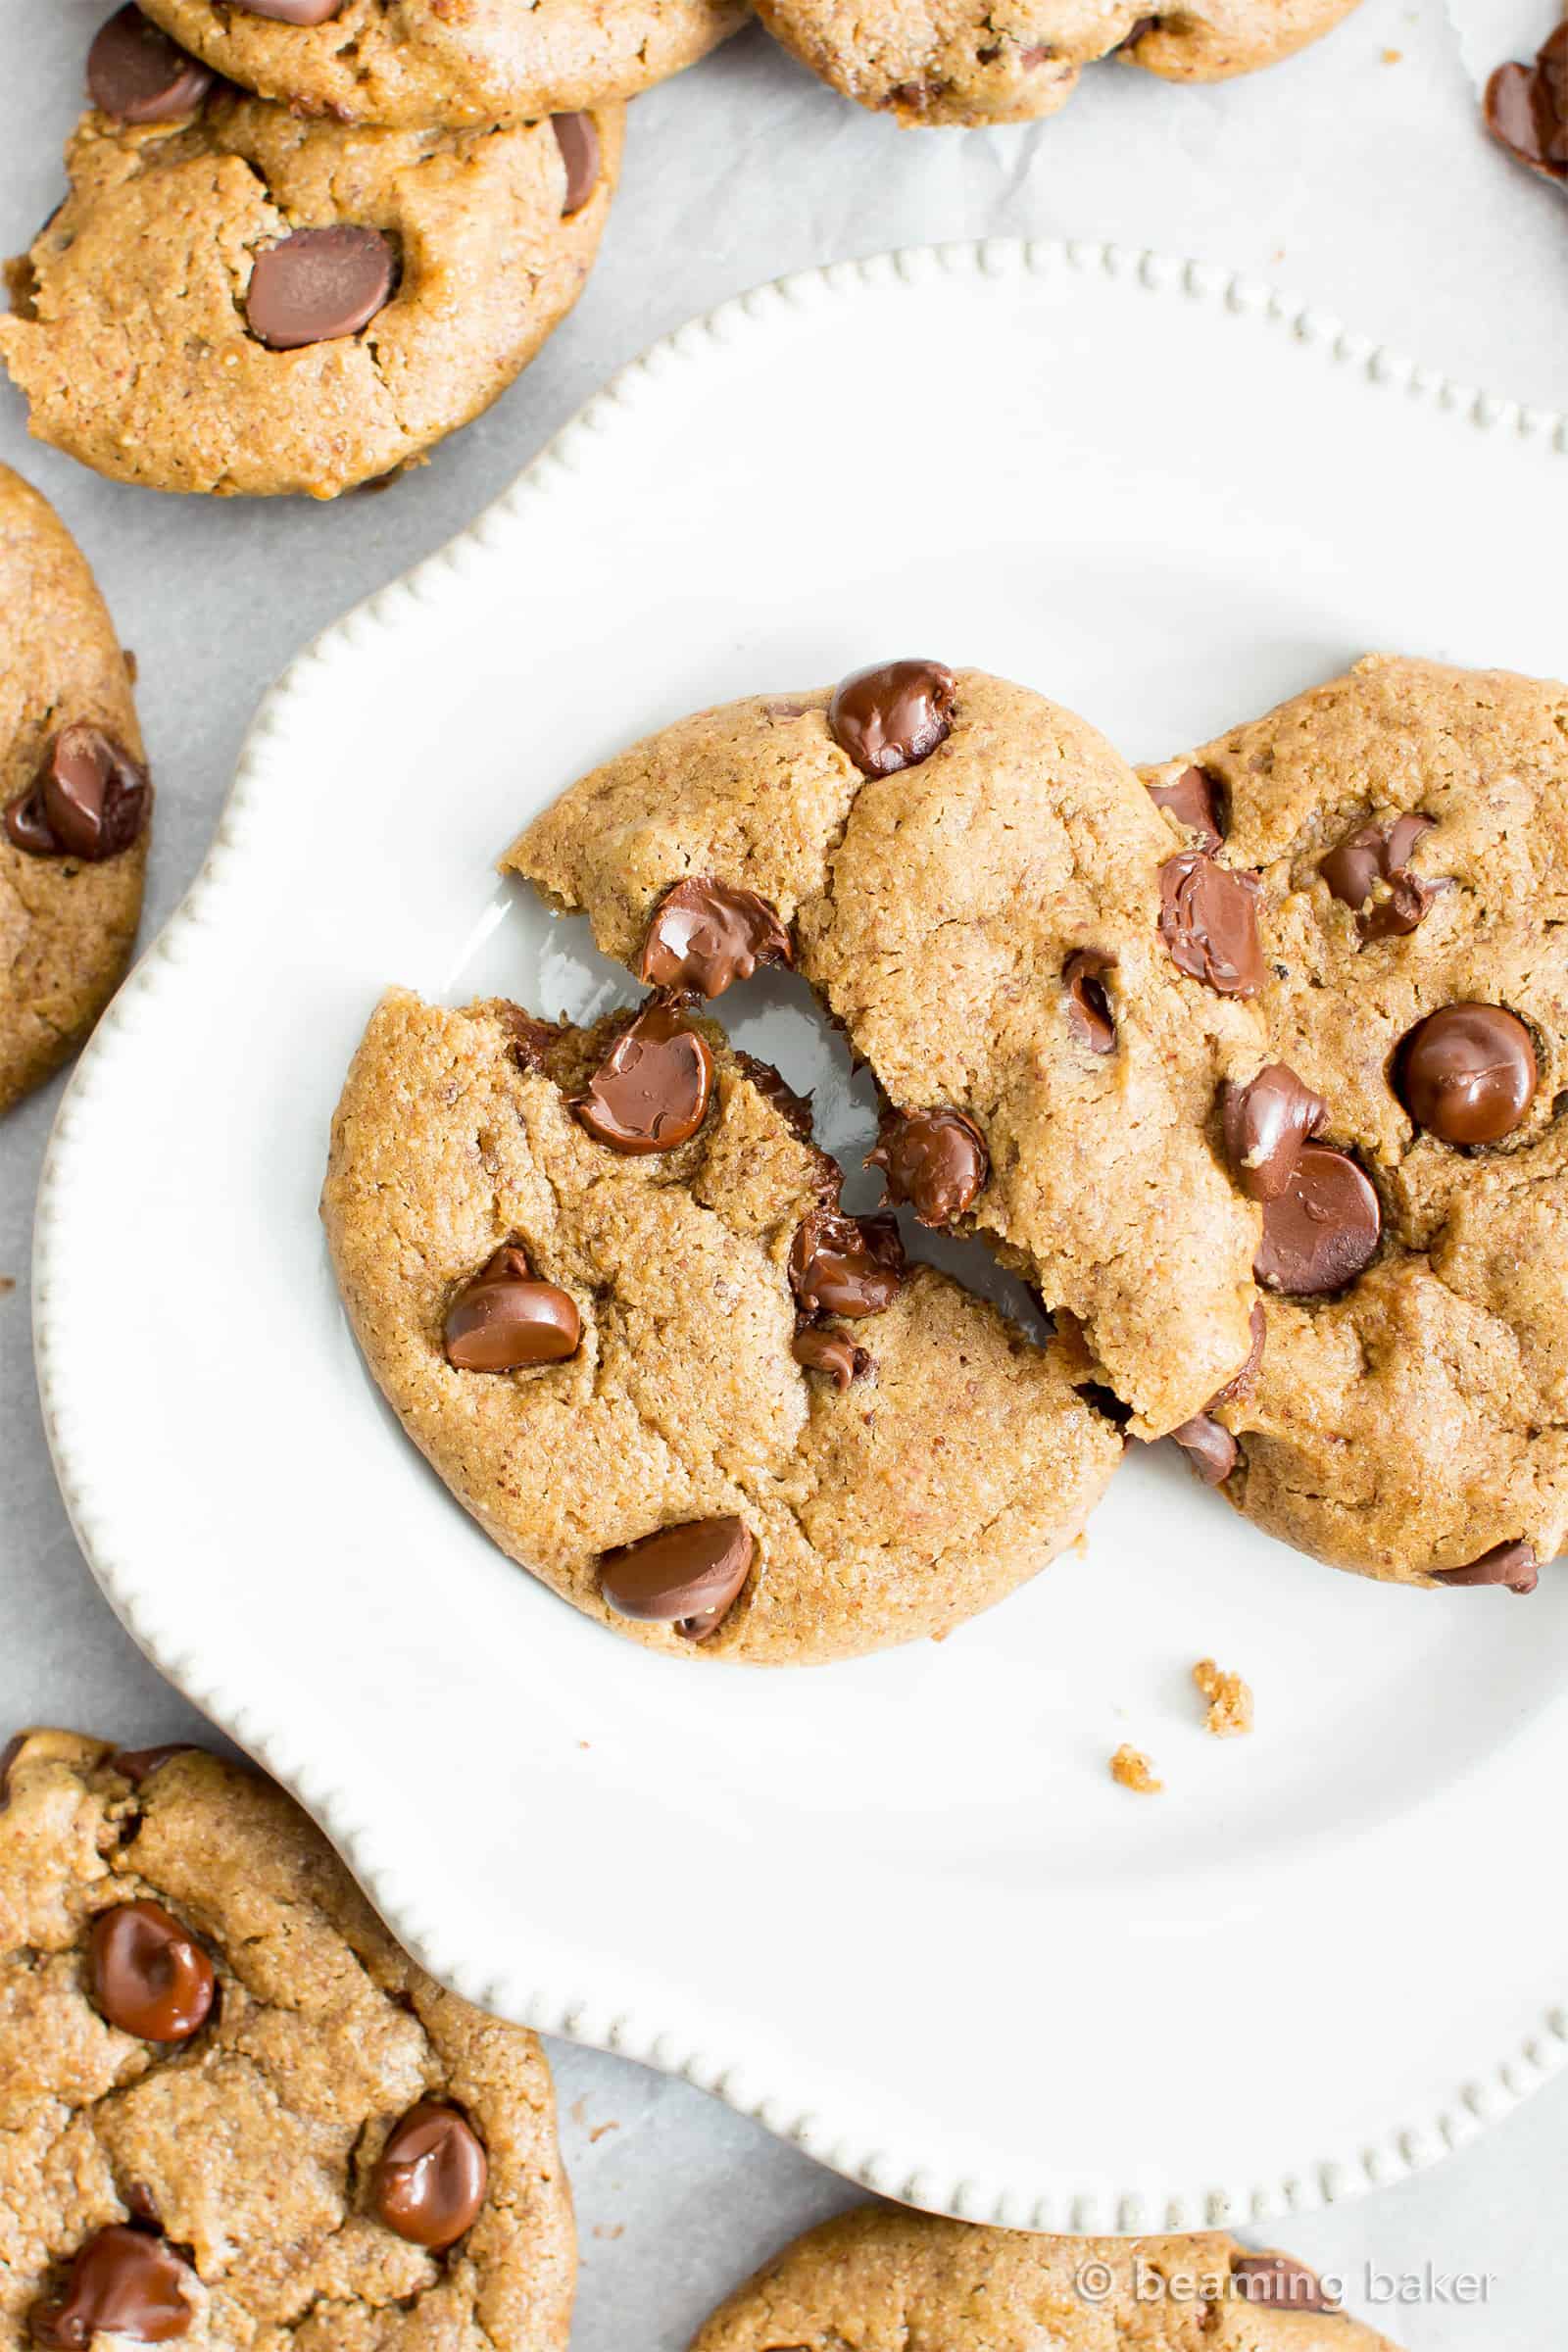 Gluten Free Almond Butter Chocolate Chip Cookies (V, GF): an irresistible recipe for perfectly chewy chocolate chip cookies made with smooth, creamy almond butter and a secret ingredient. #Vegan #GlutenFree #DairyFree #Cookies #Dessert #AD | Recipe on BeamingBaker.com